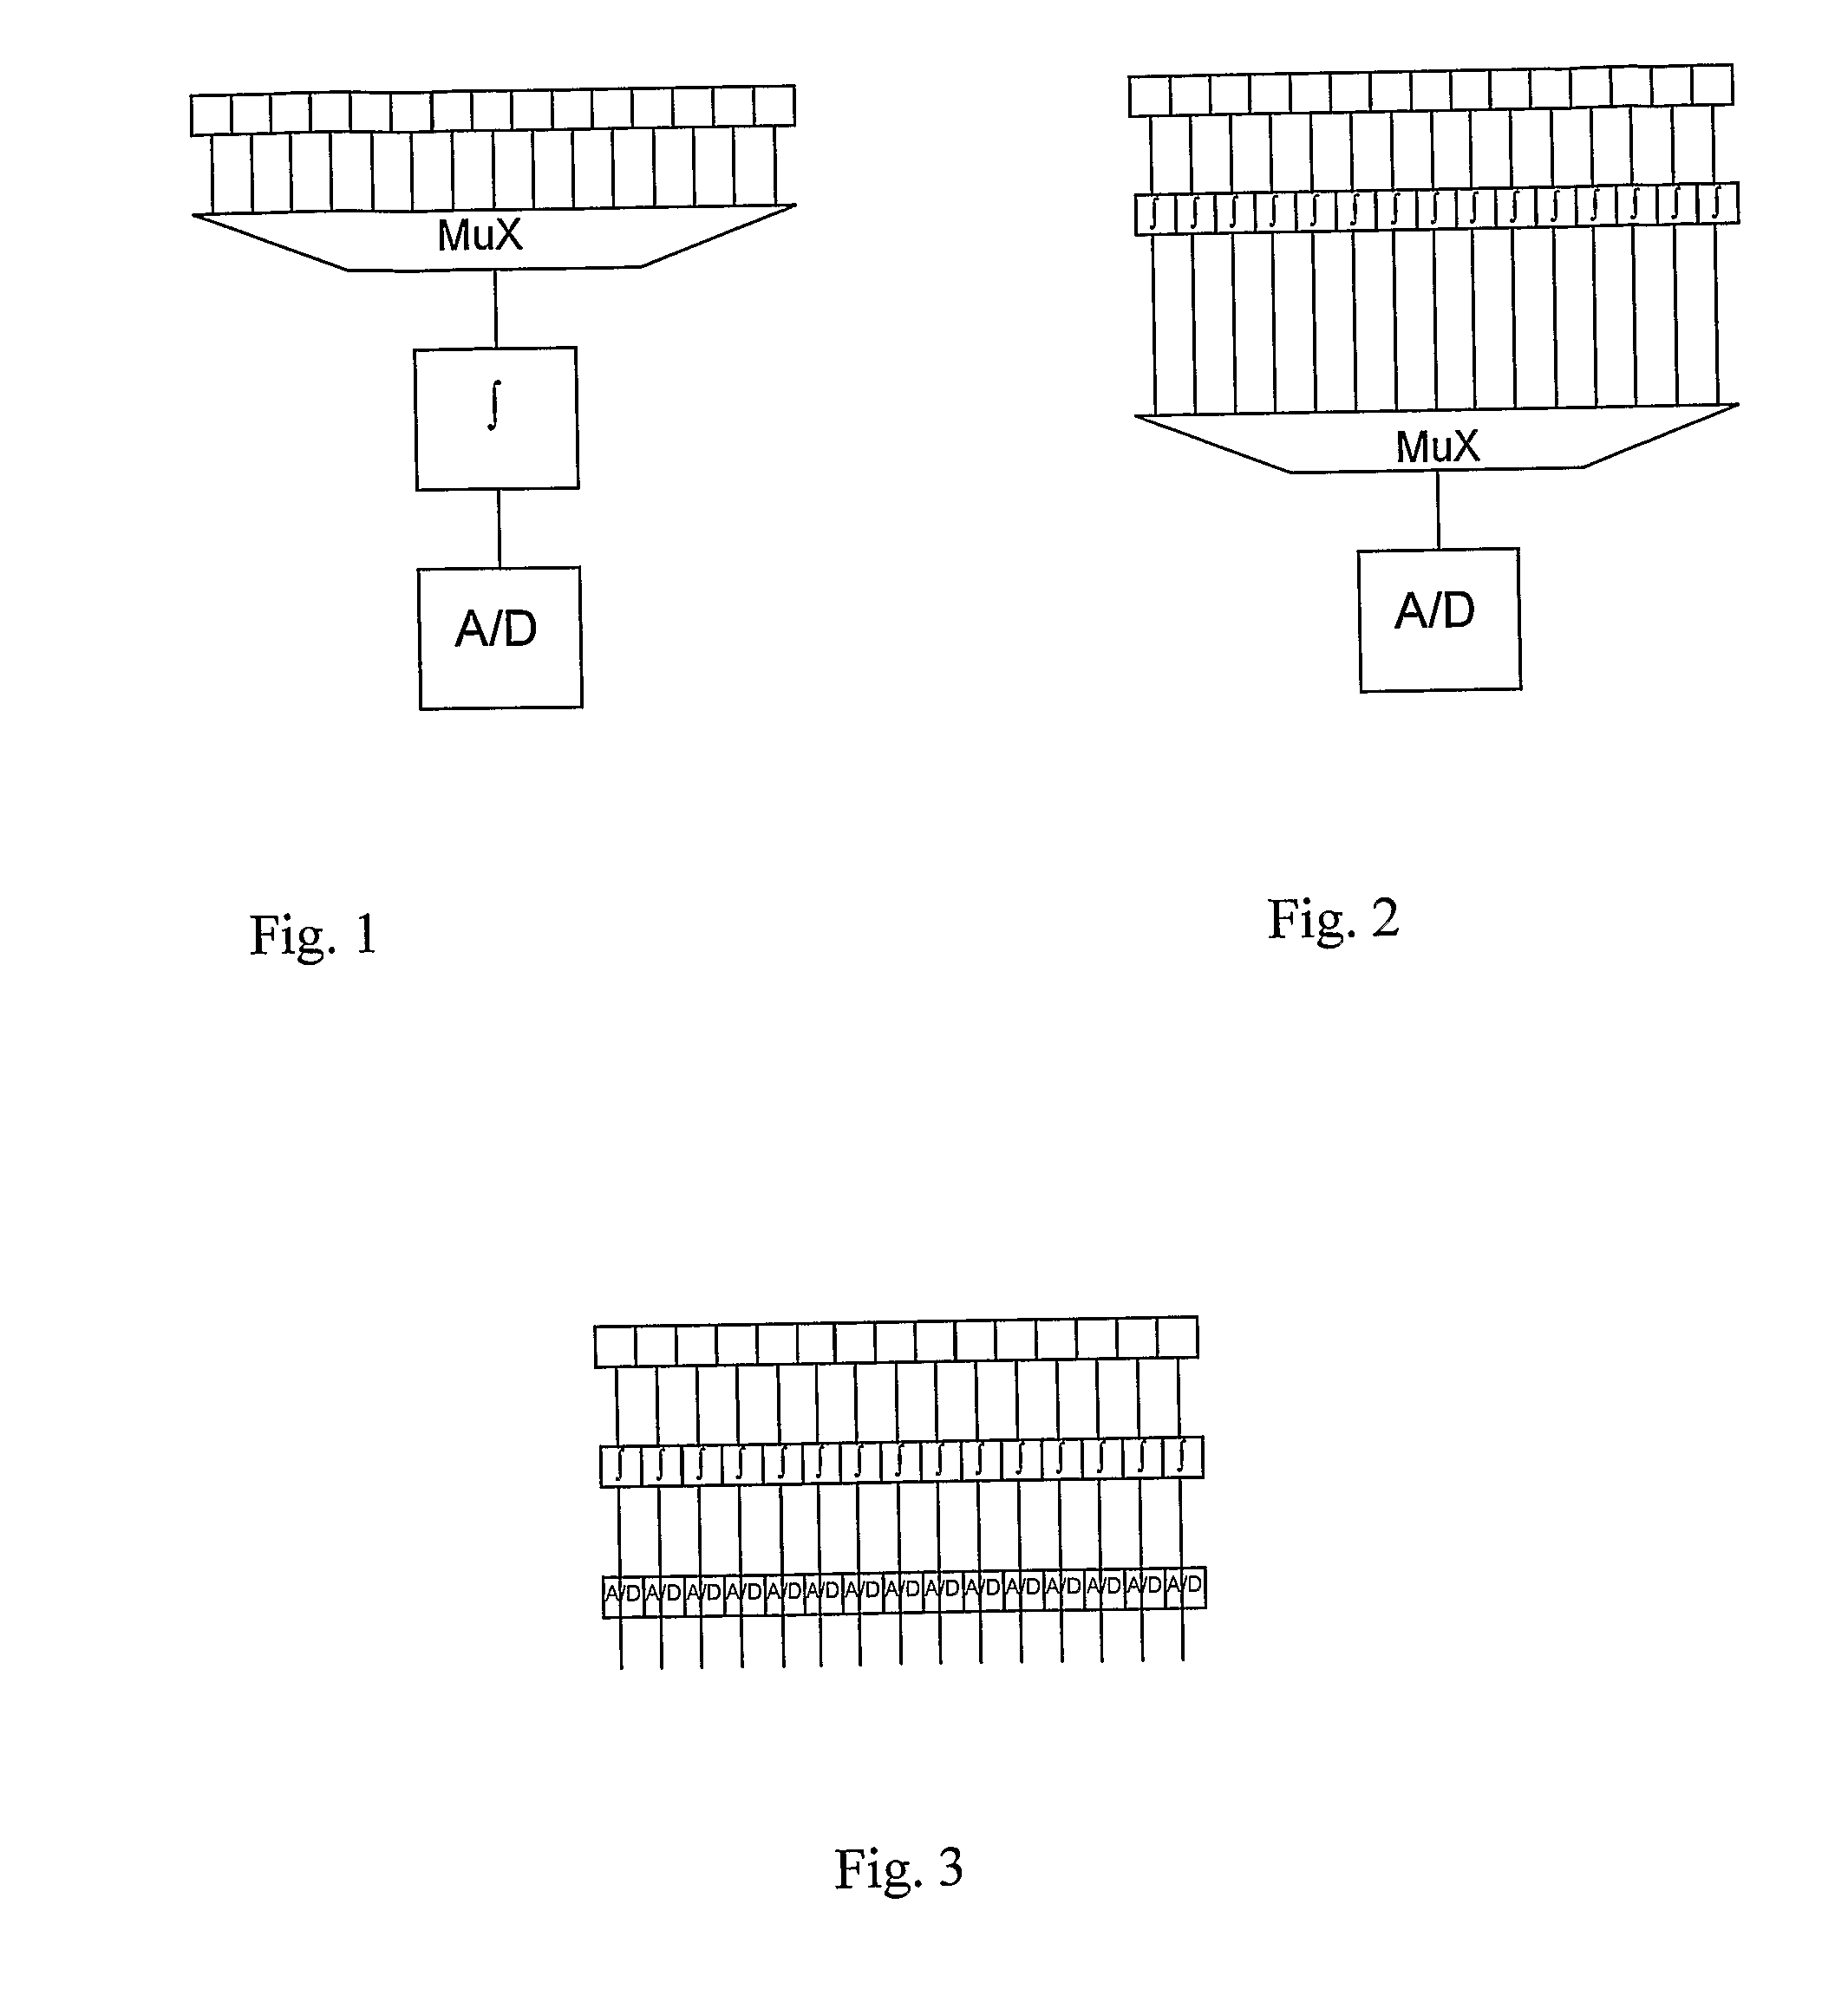 Apparatus and method for operating a spectrometer